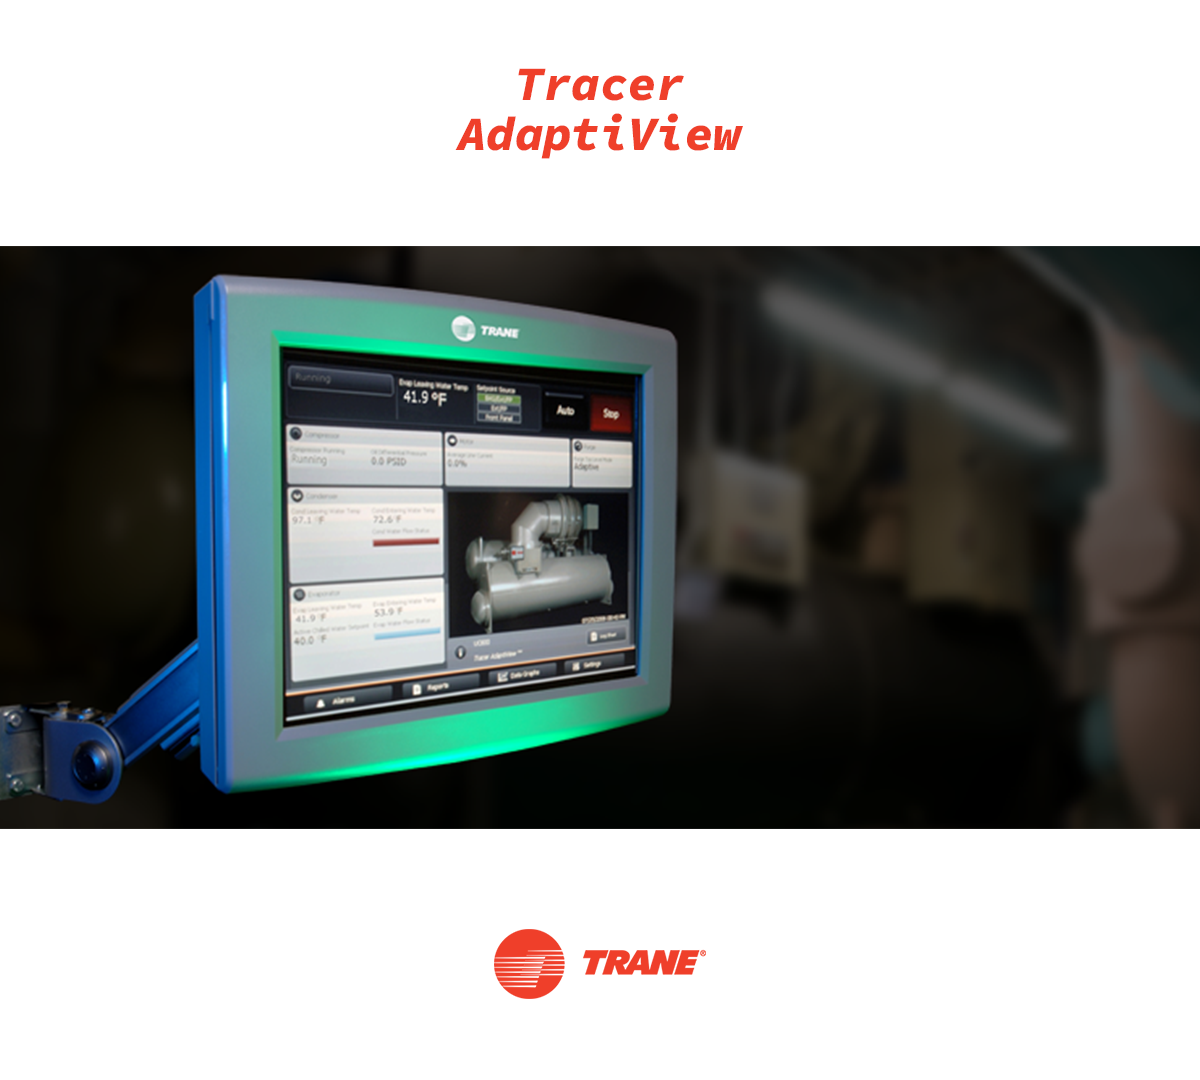 Tracer AdaptiView